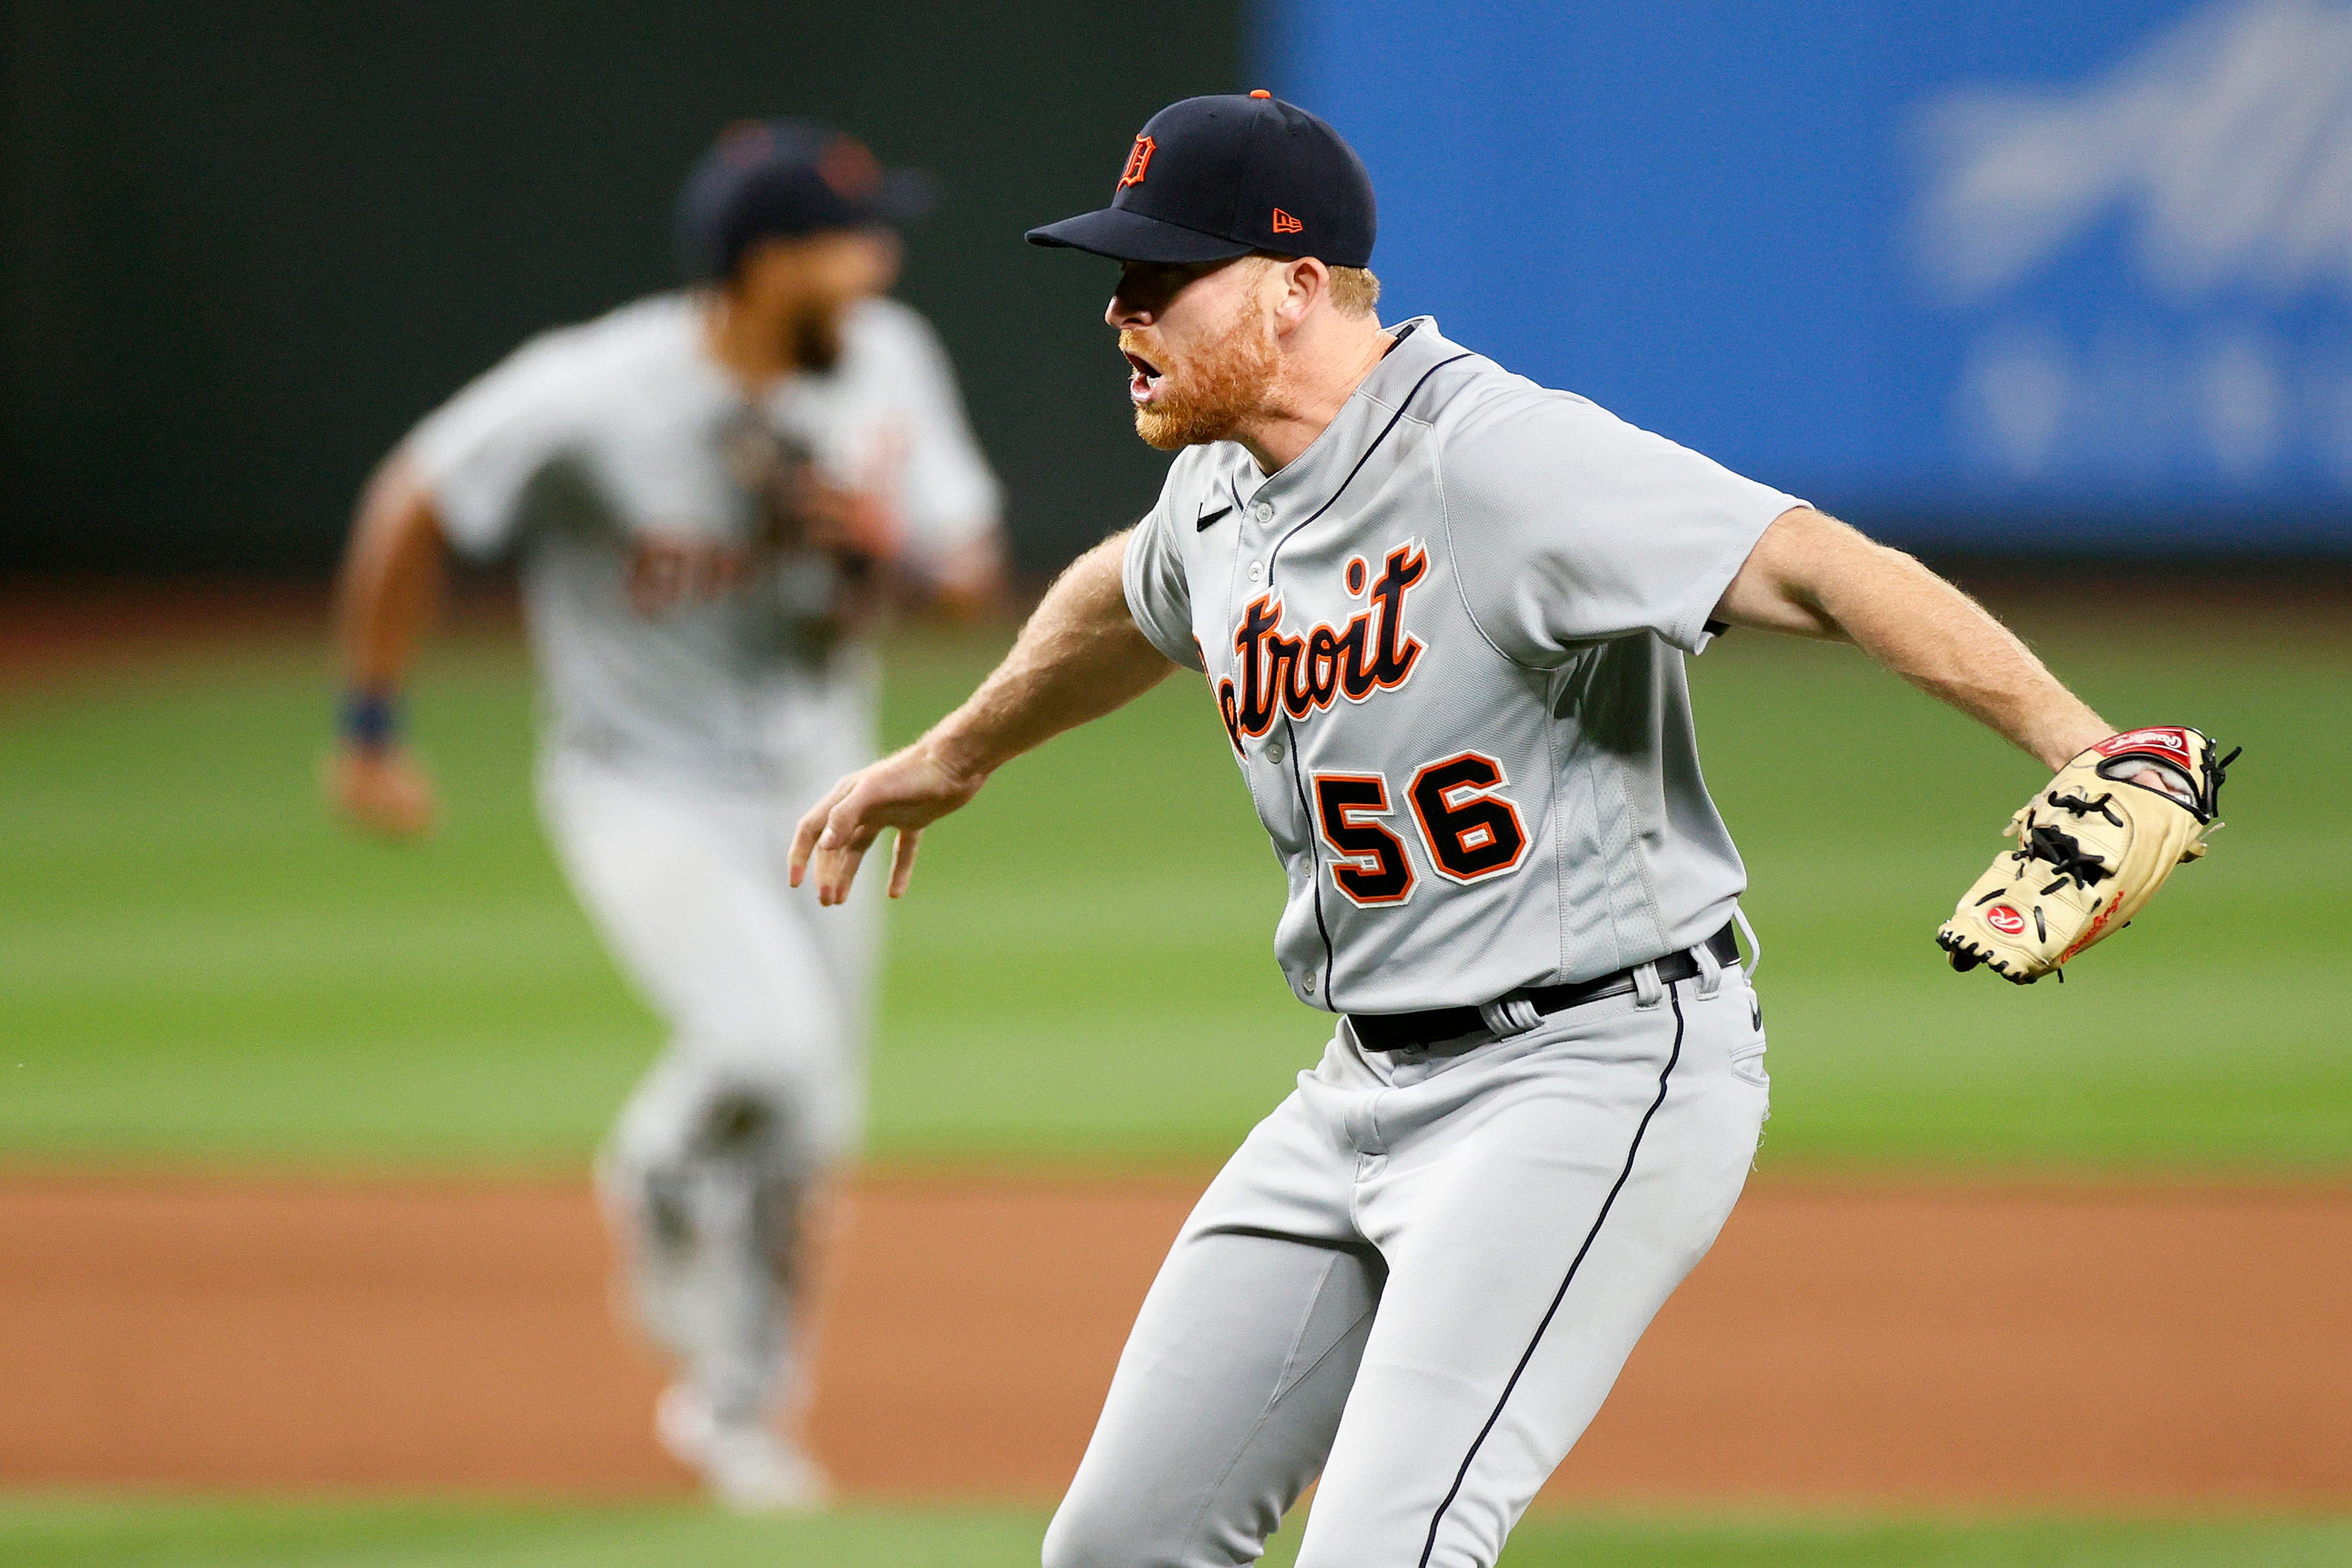 Spencer Turnbull of the Detroit Tigers celebrates after his no-hitter against the Seattle Mariners at T-Mobile Park on May 18, 2021 in Seattle.